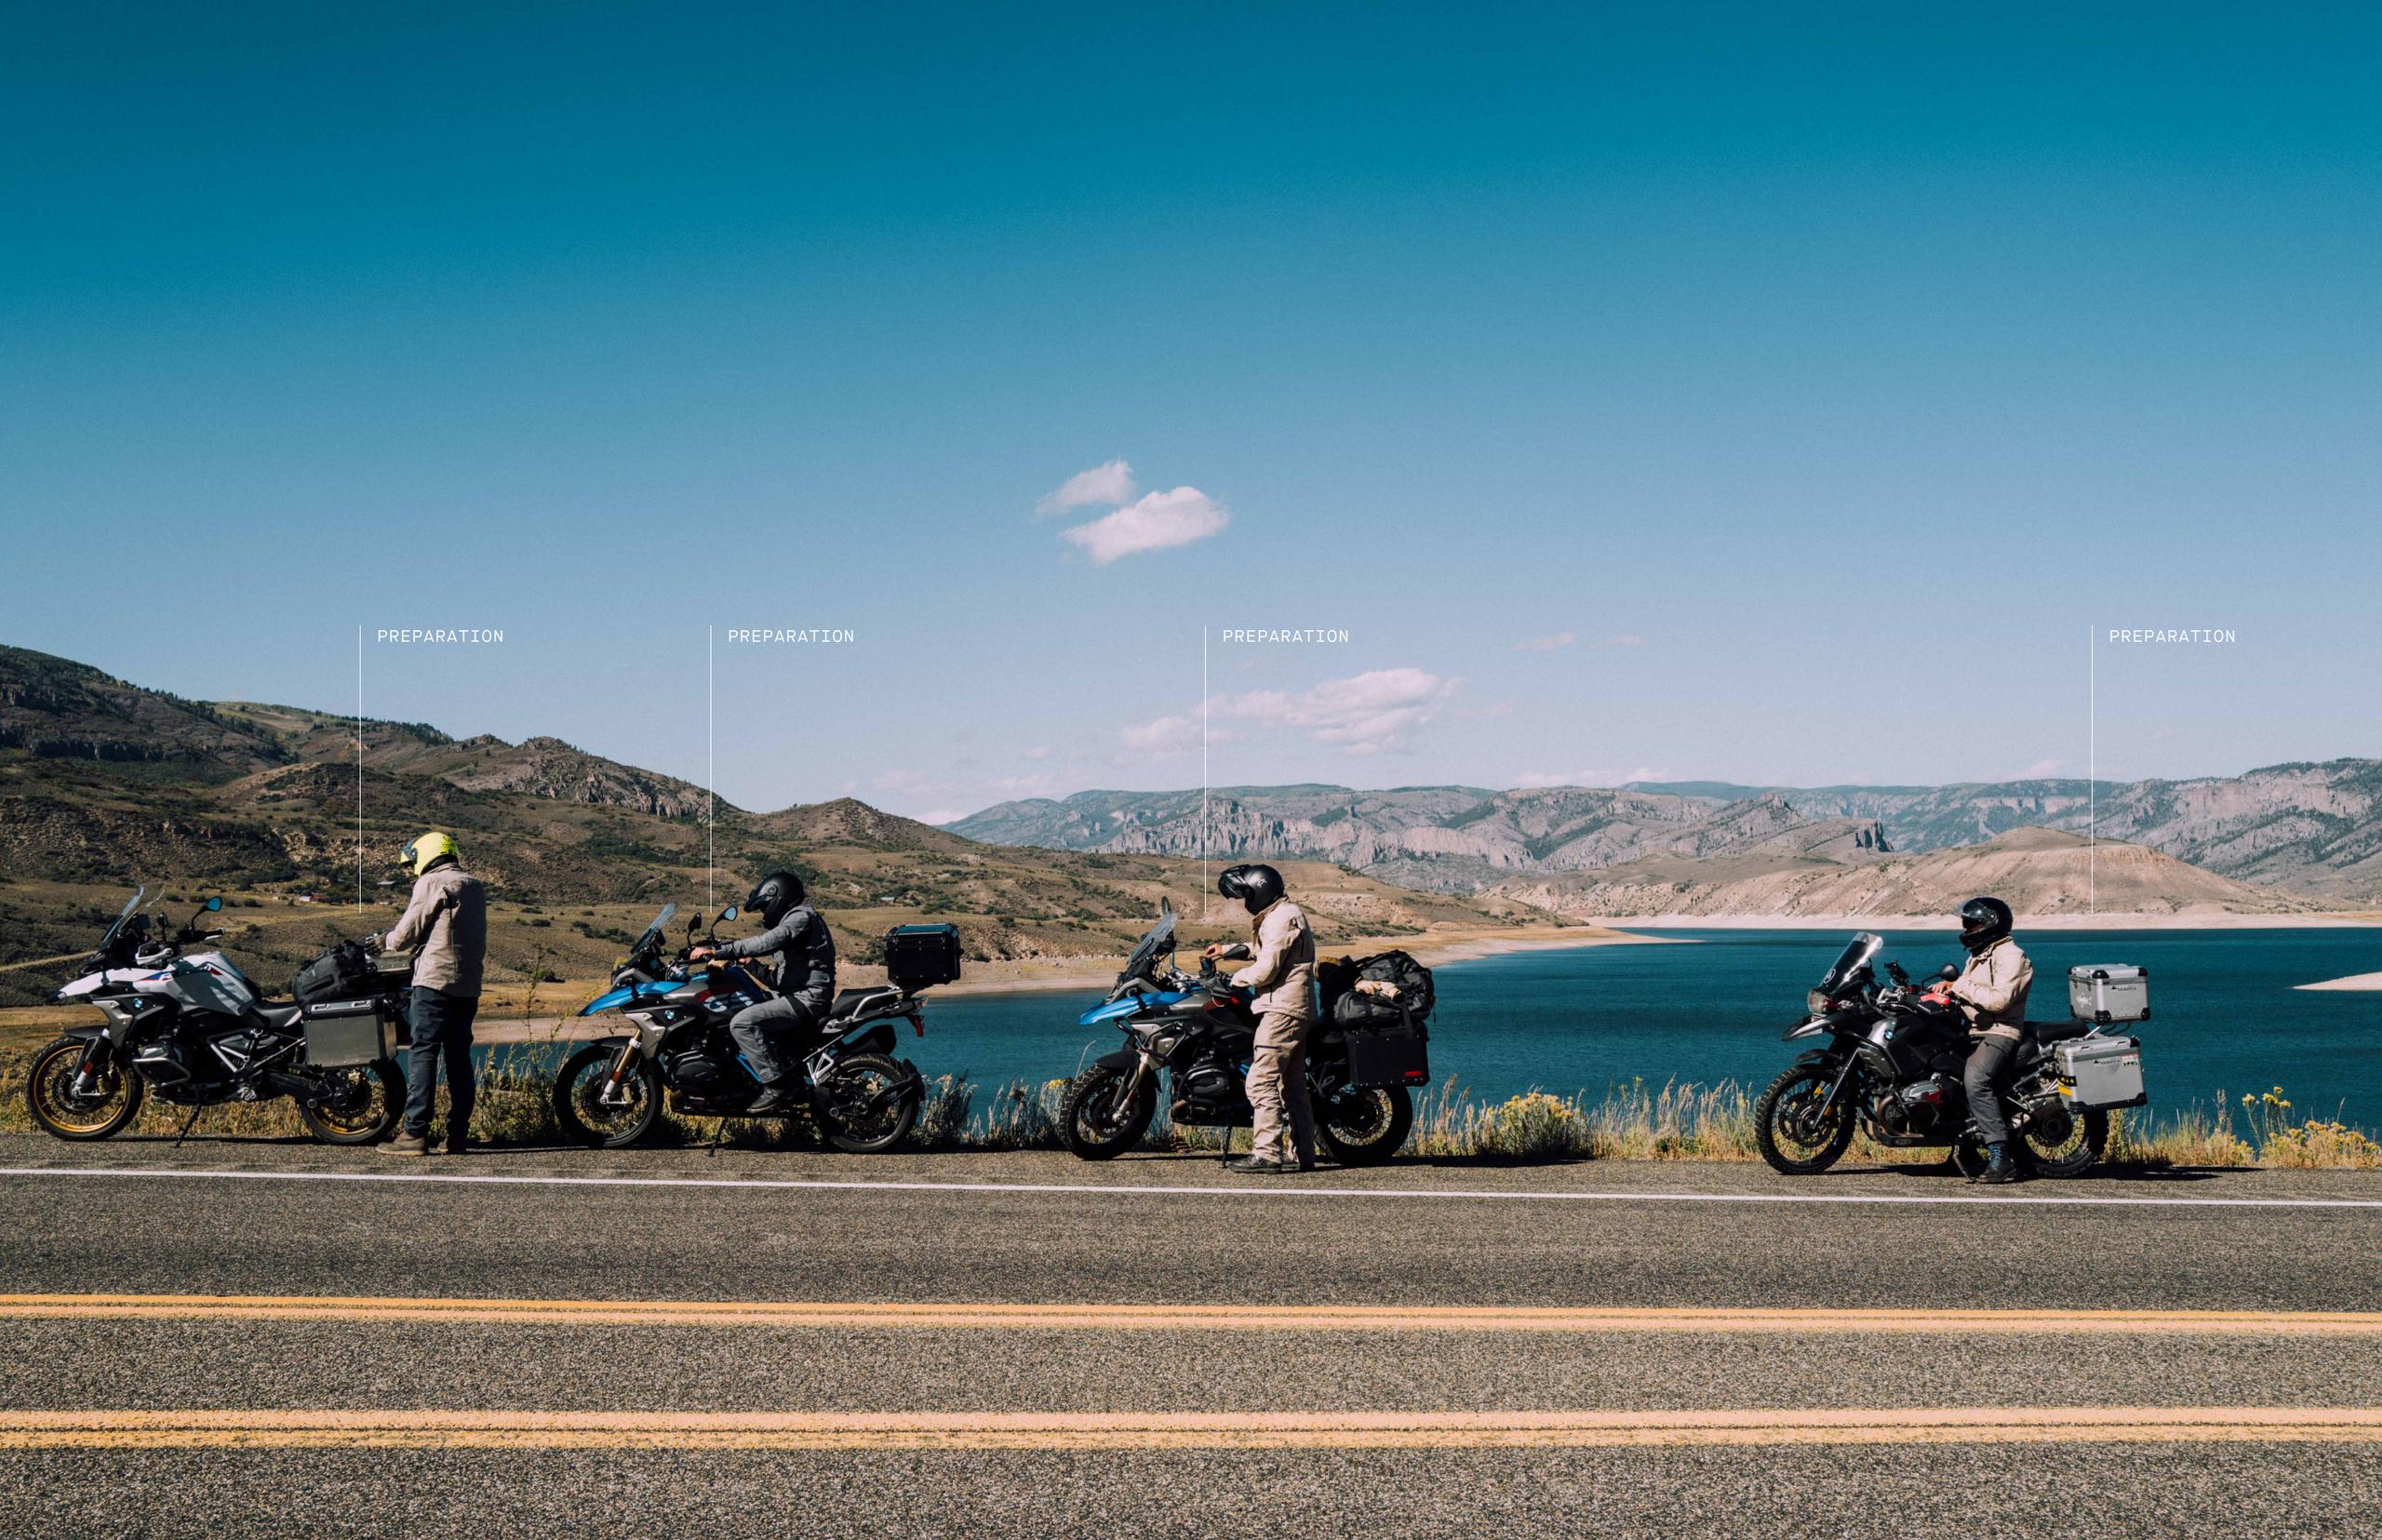 Four motorcyclists along roadside in front of Colorado landscape with lake